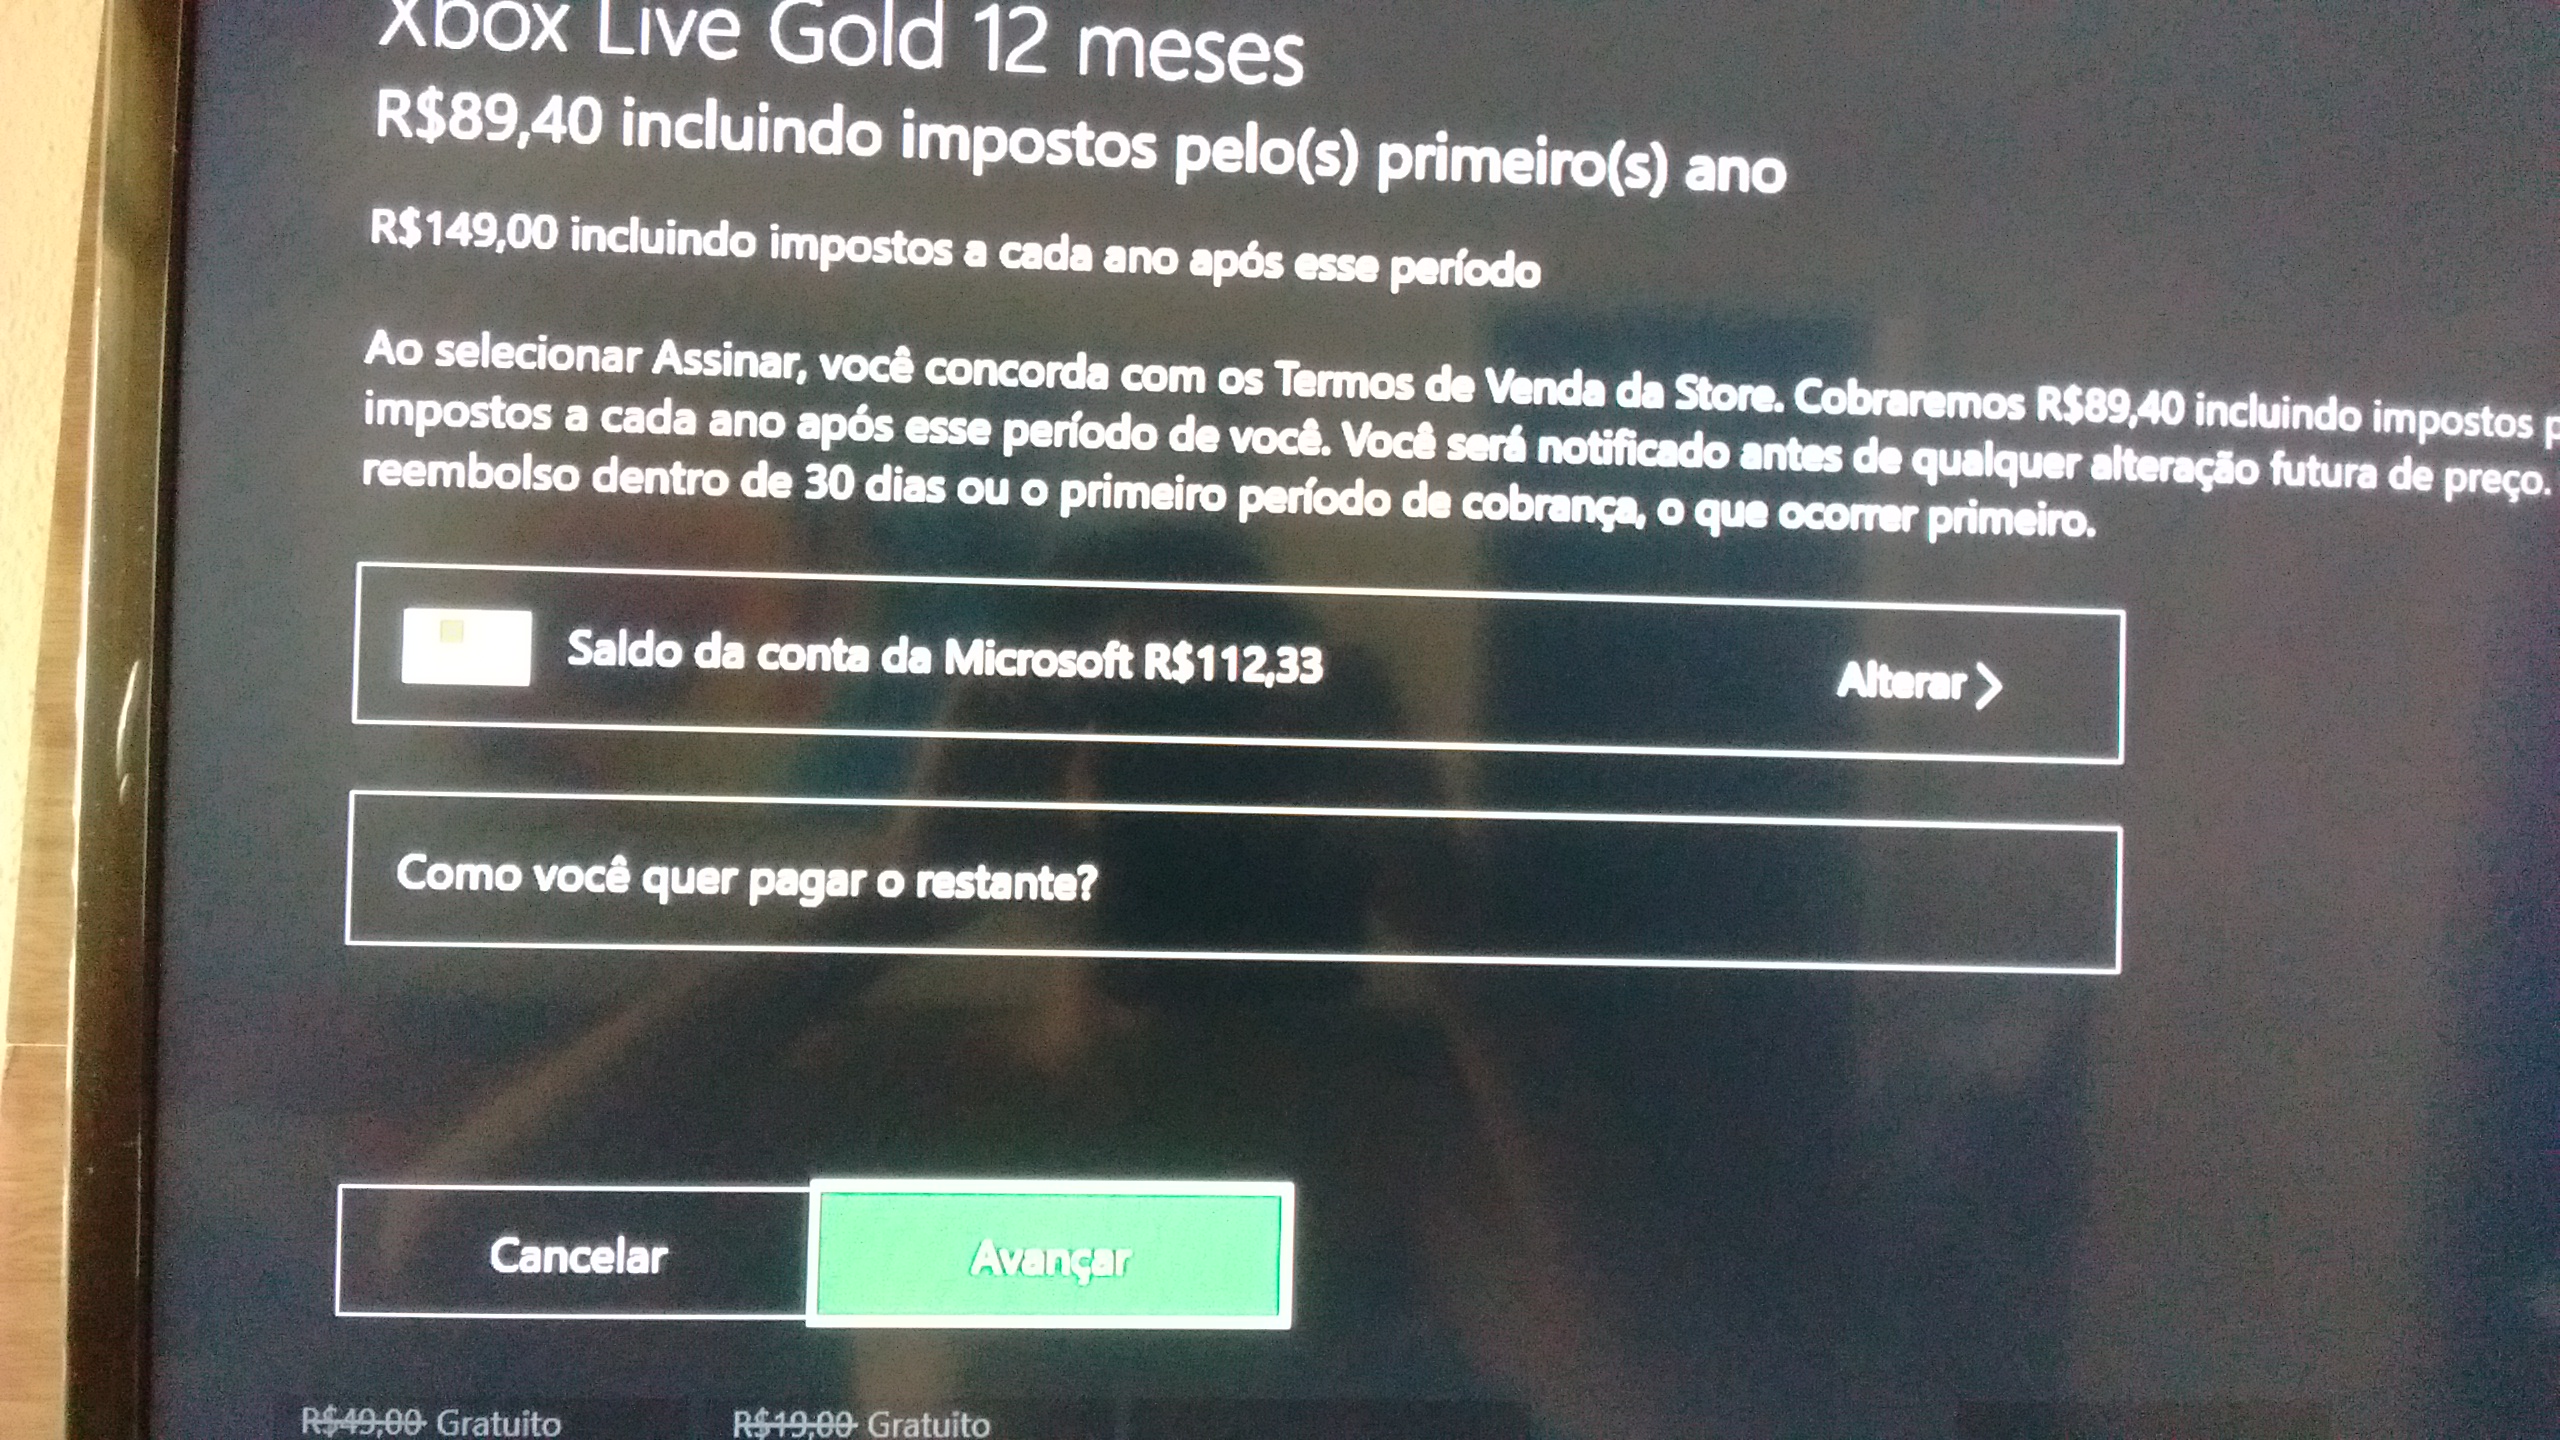 pay for xbox live gold